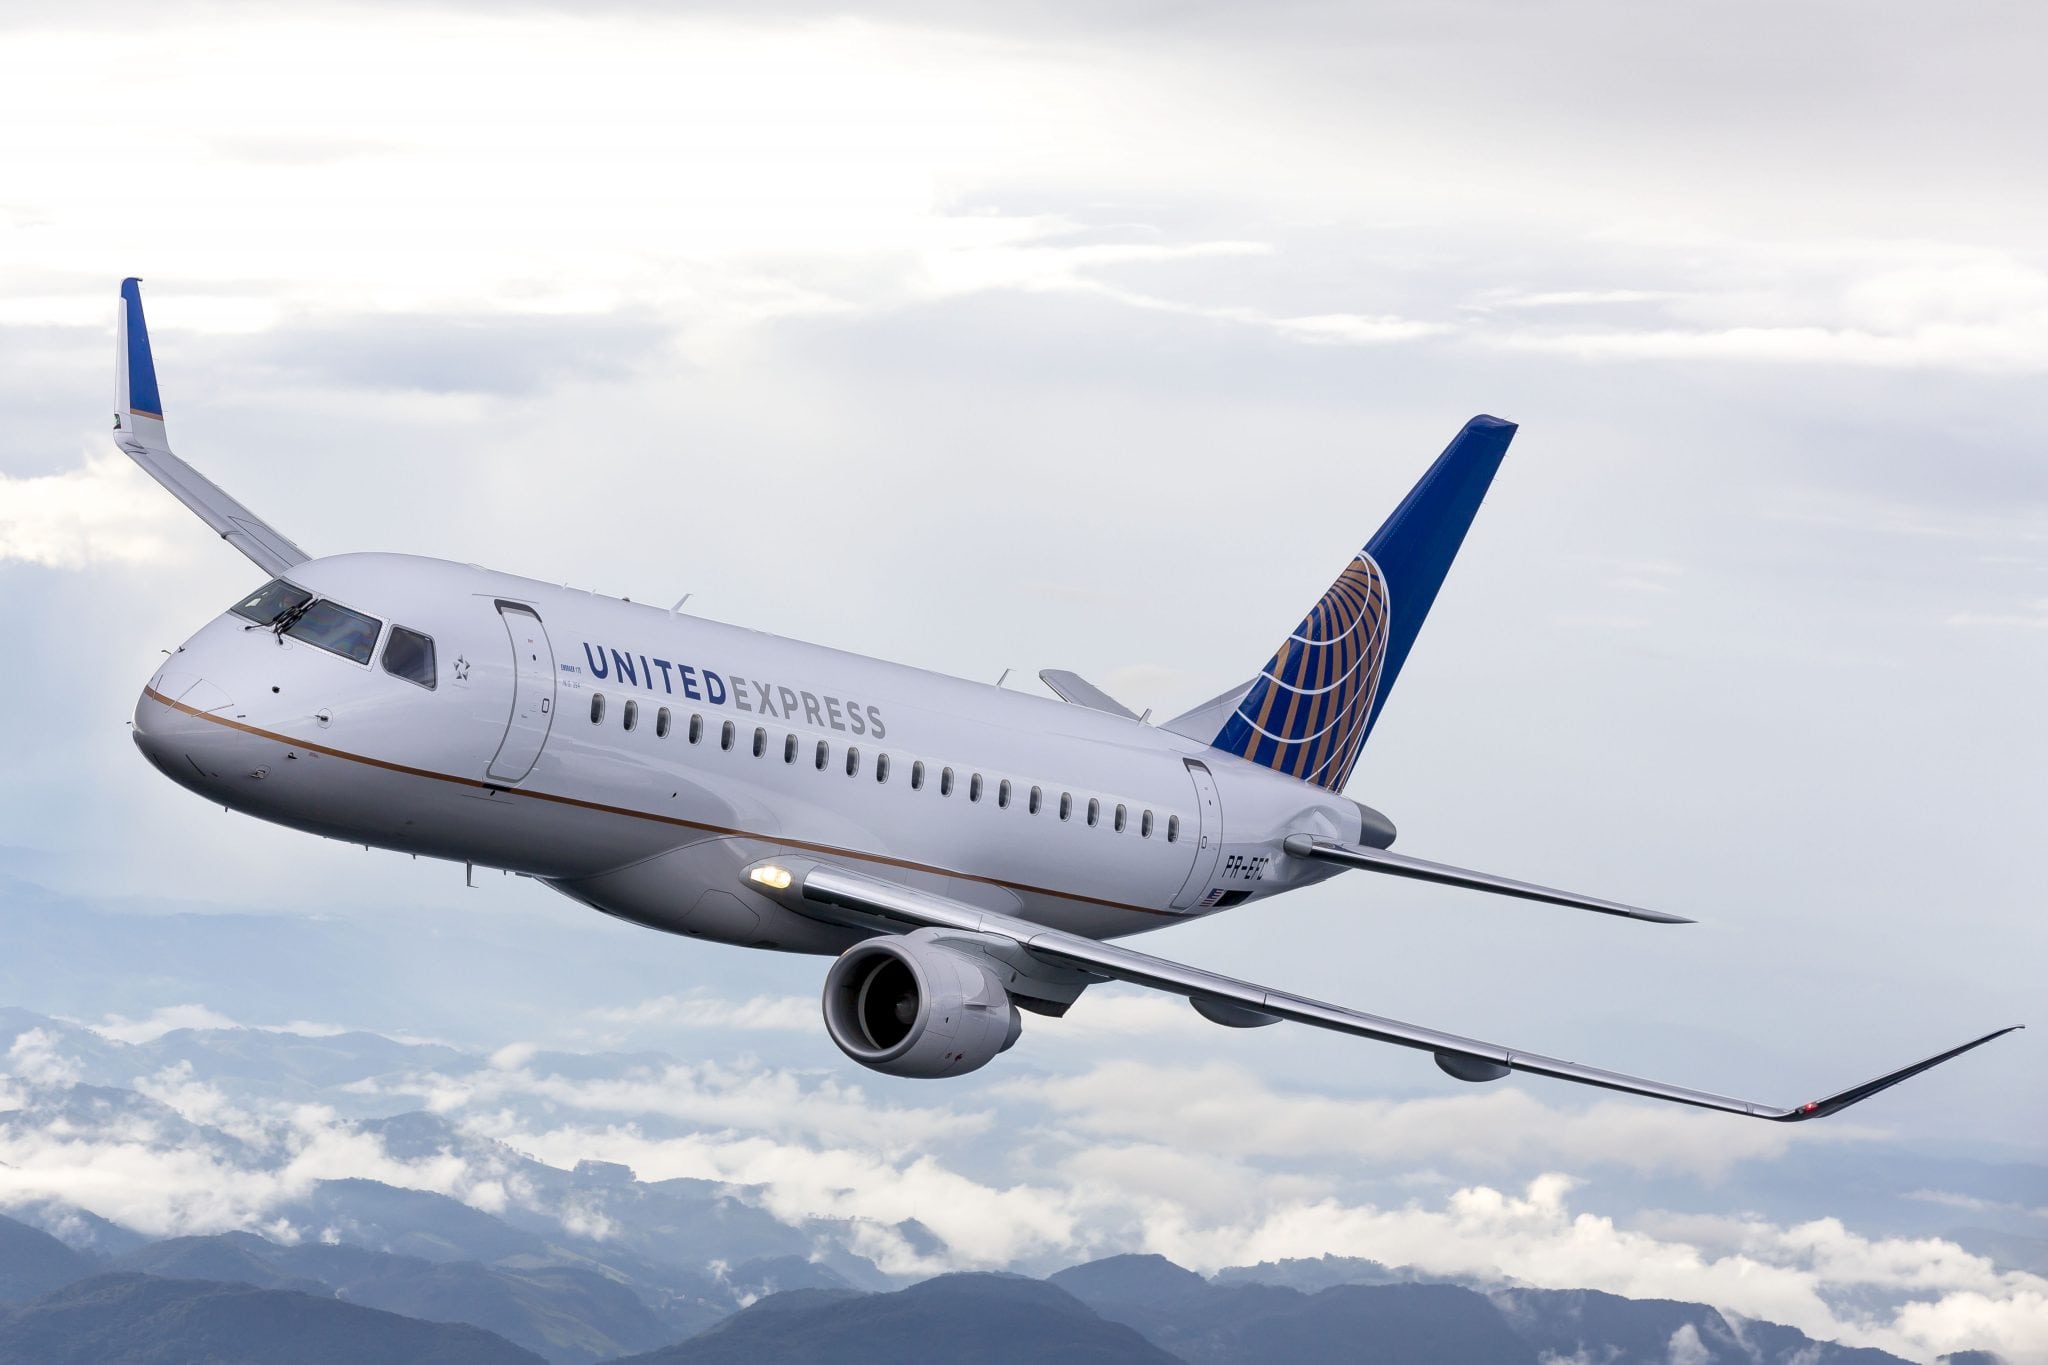 A United Express Embraer E175 jet in flight